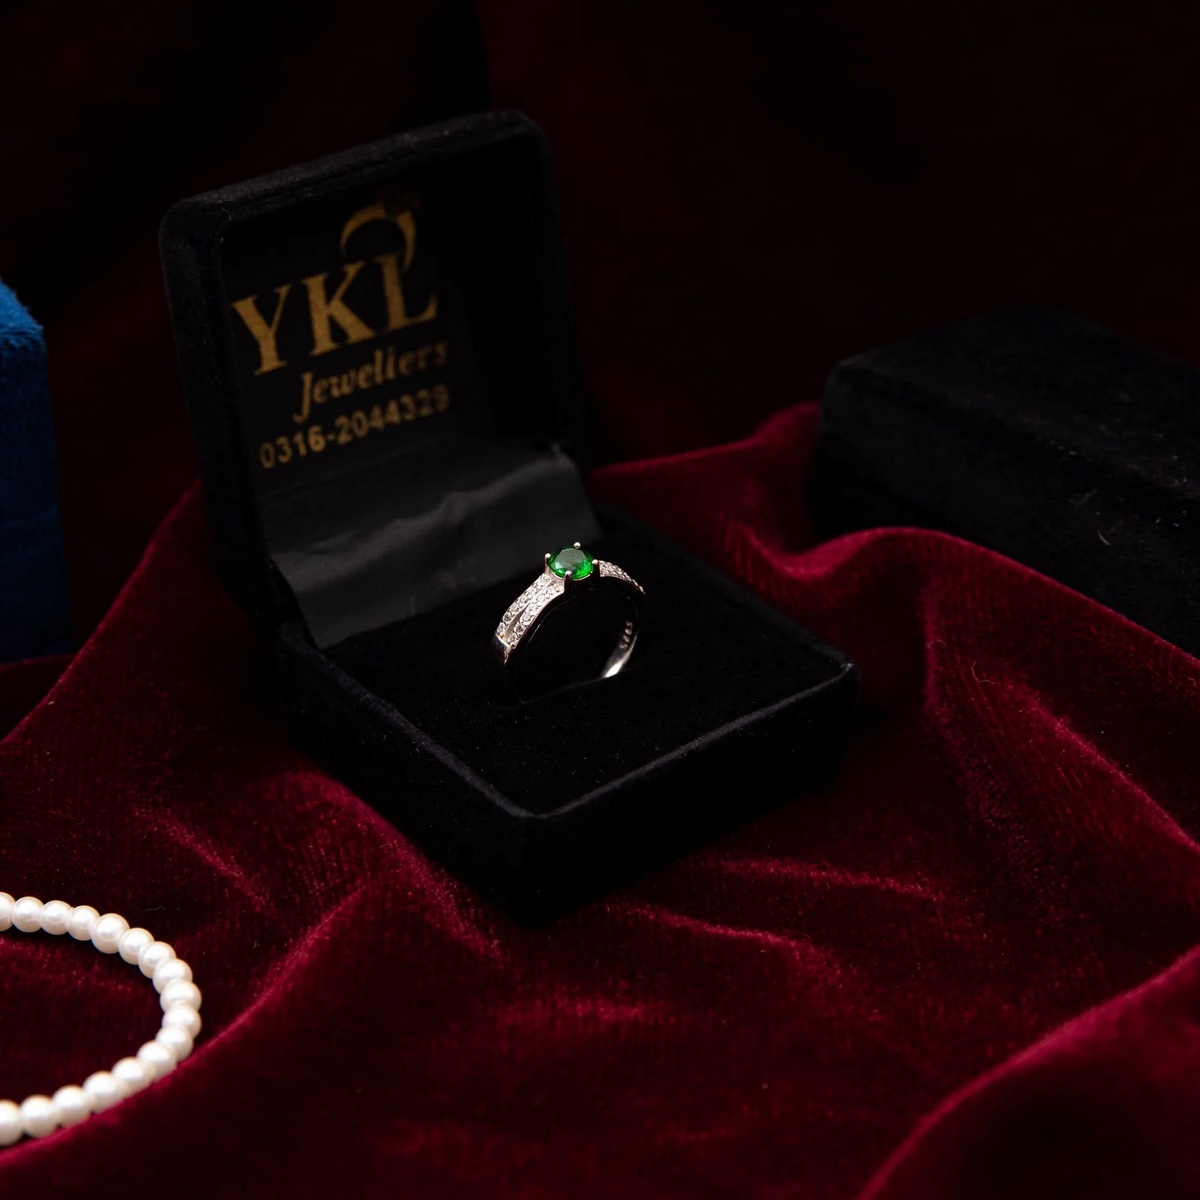 ROUND EMERALD RING YKL Jewellers Ring Collection